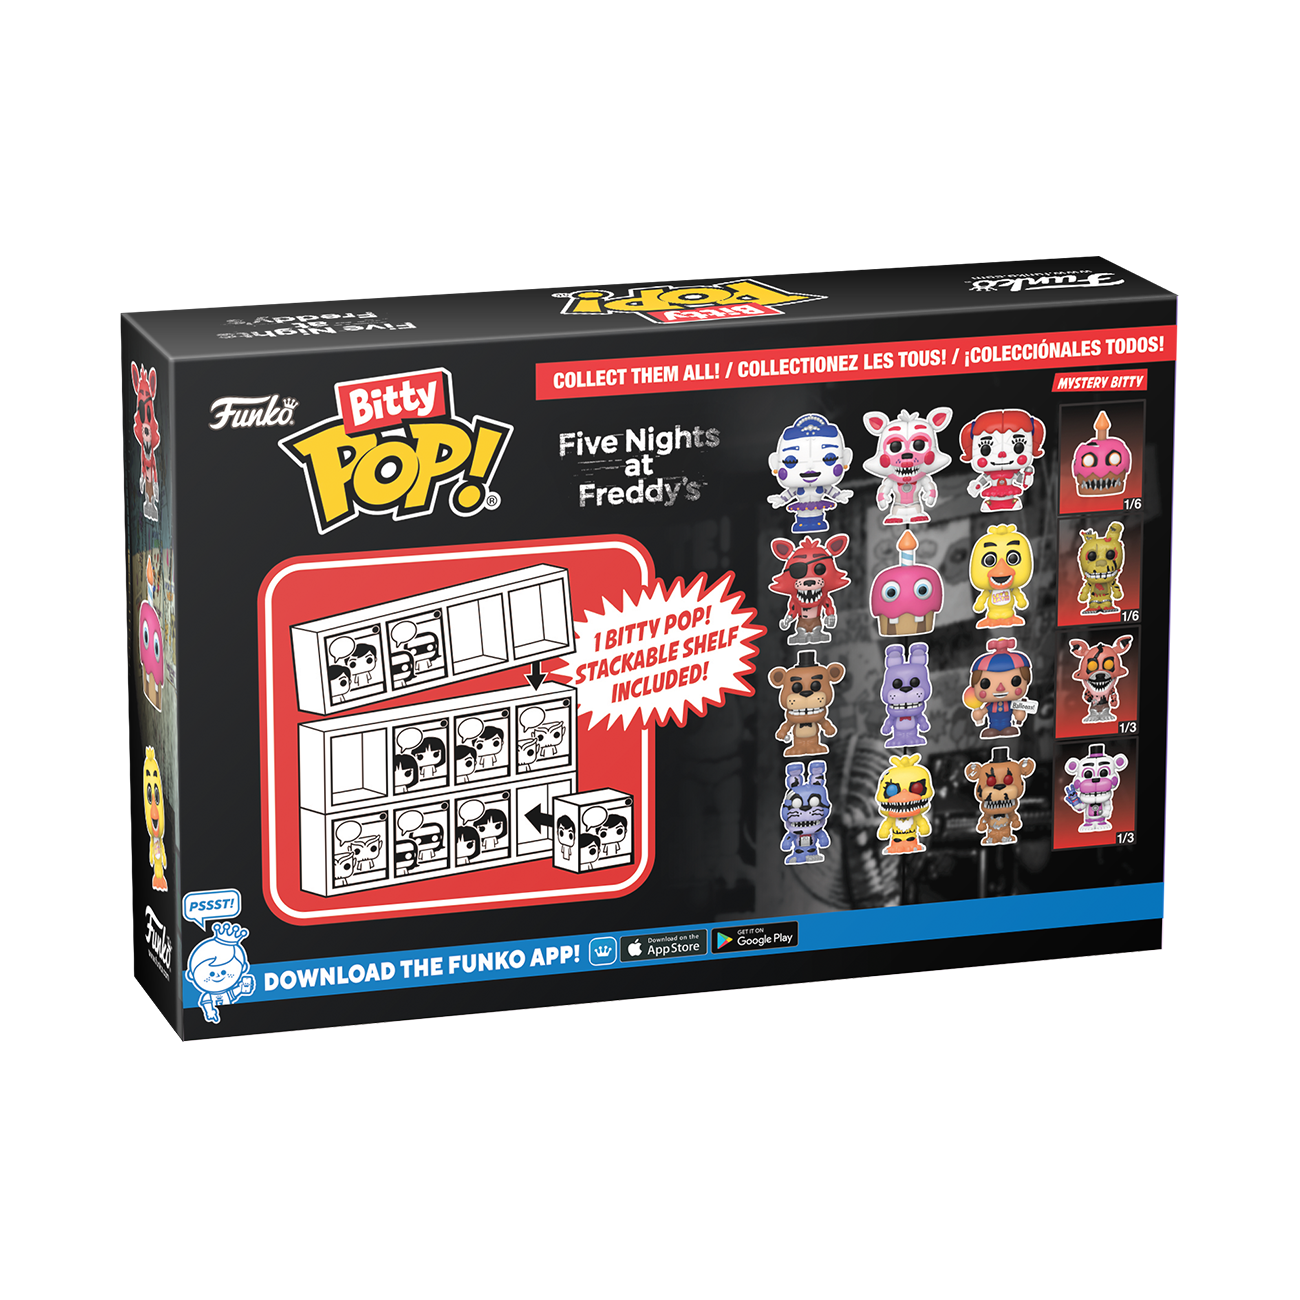 Bitty Pop! Five Nights at Freddy's 4-Pack Series 1